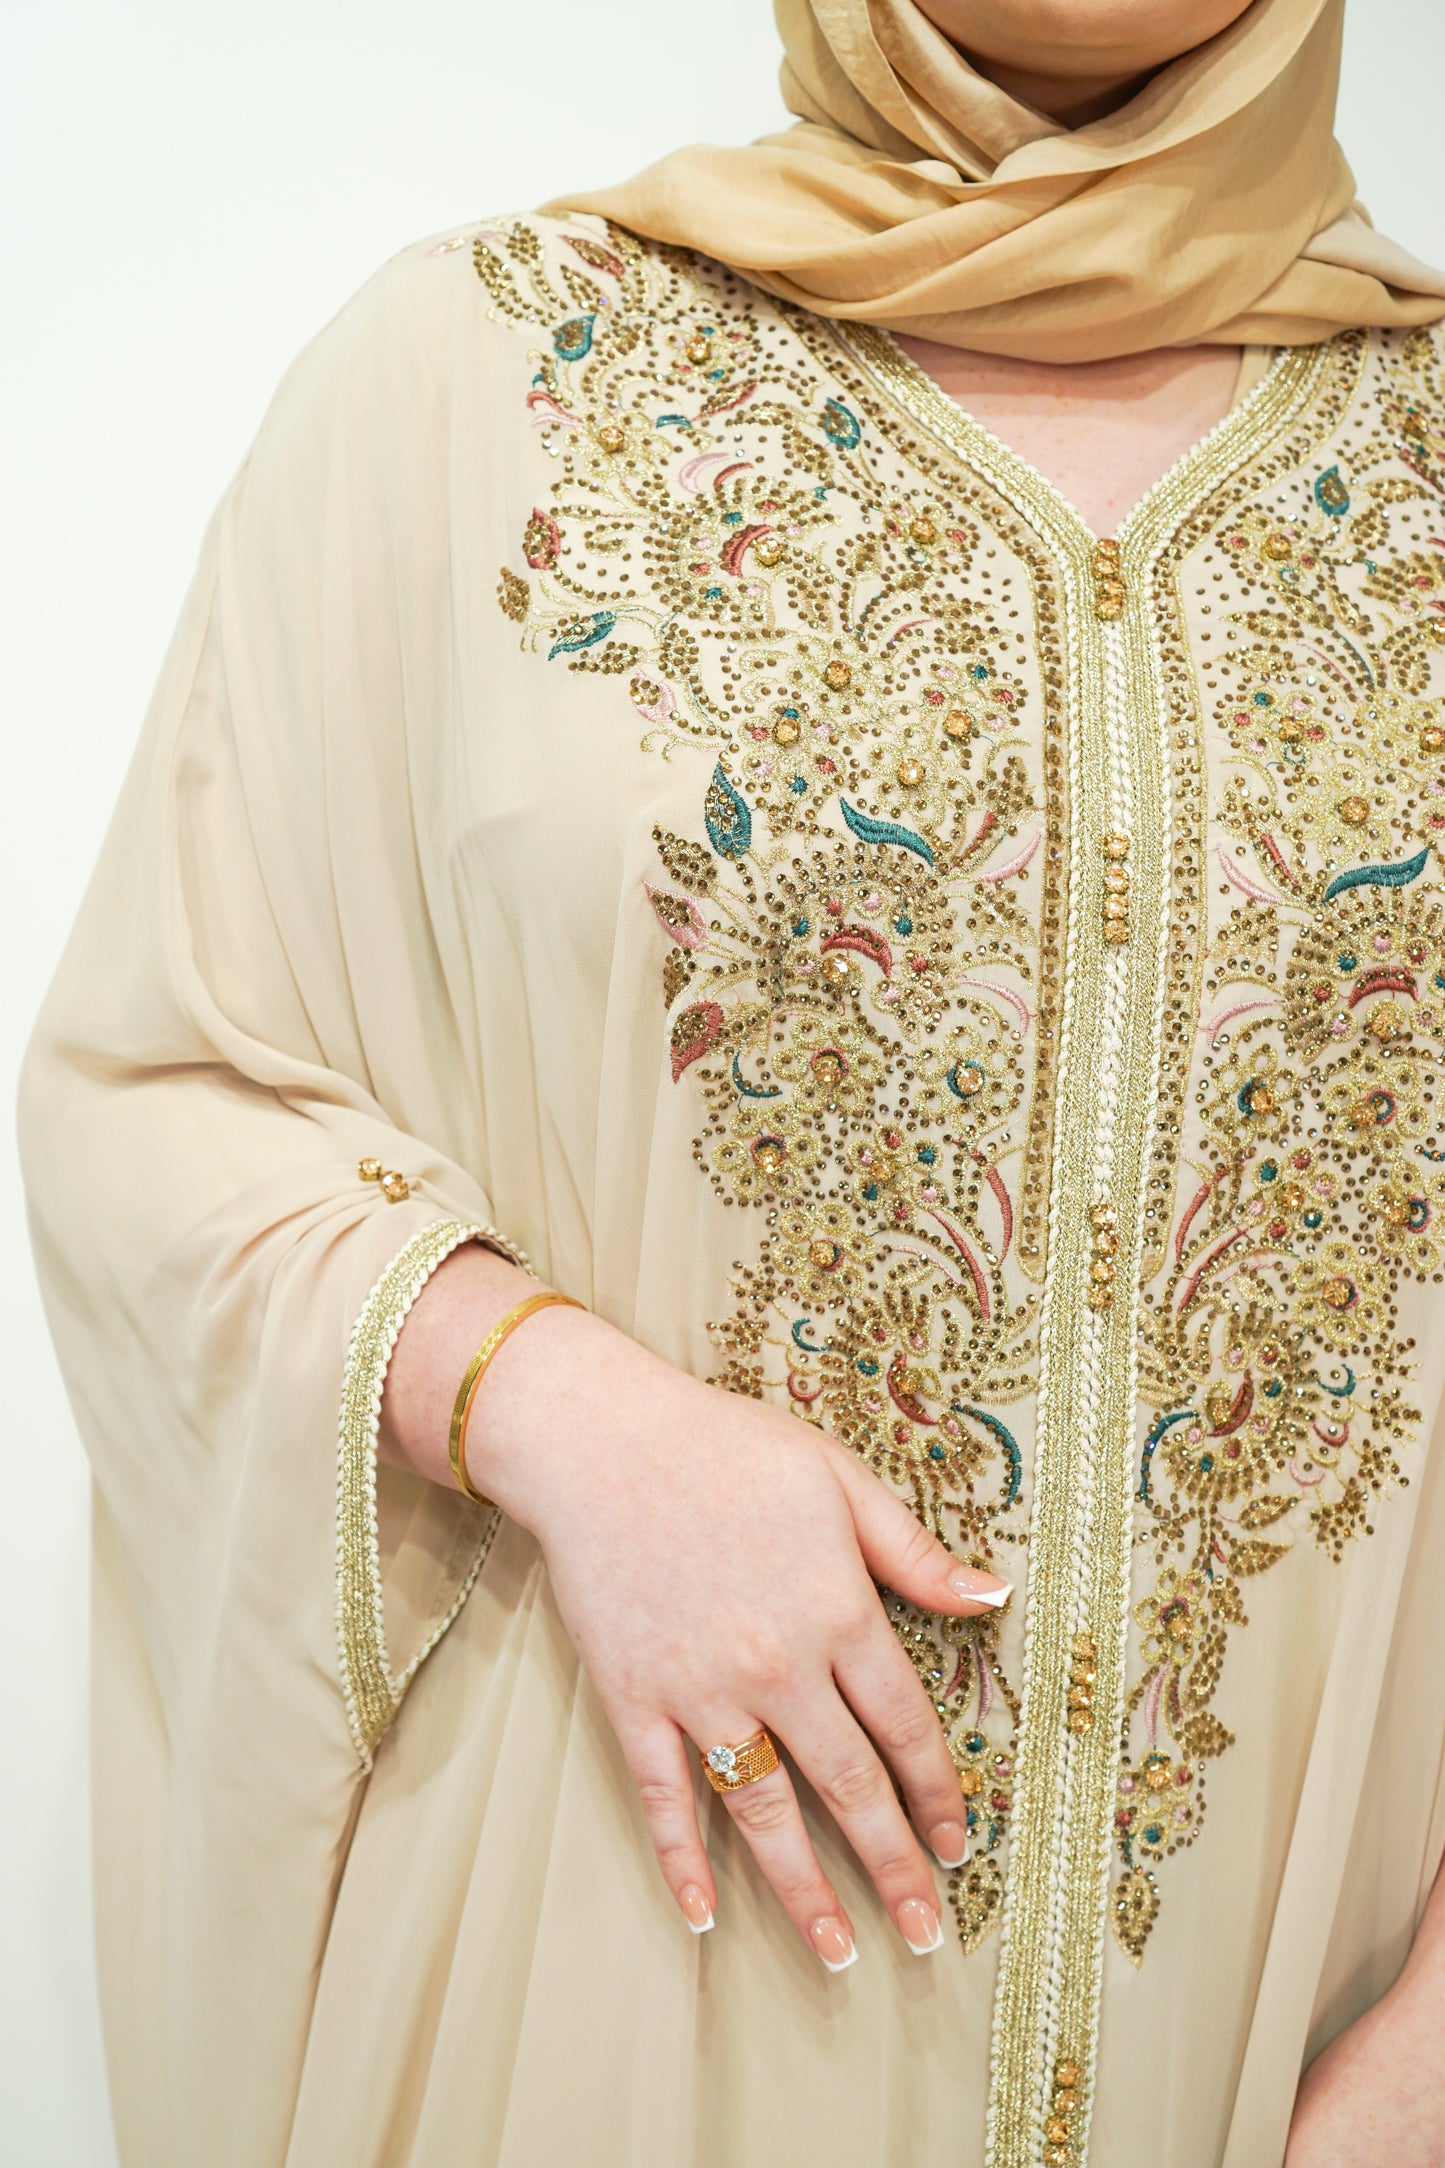 Beige Chiffon Farasha Abaya with Exquisite Embroidery and Stone Accents